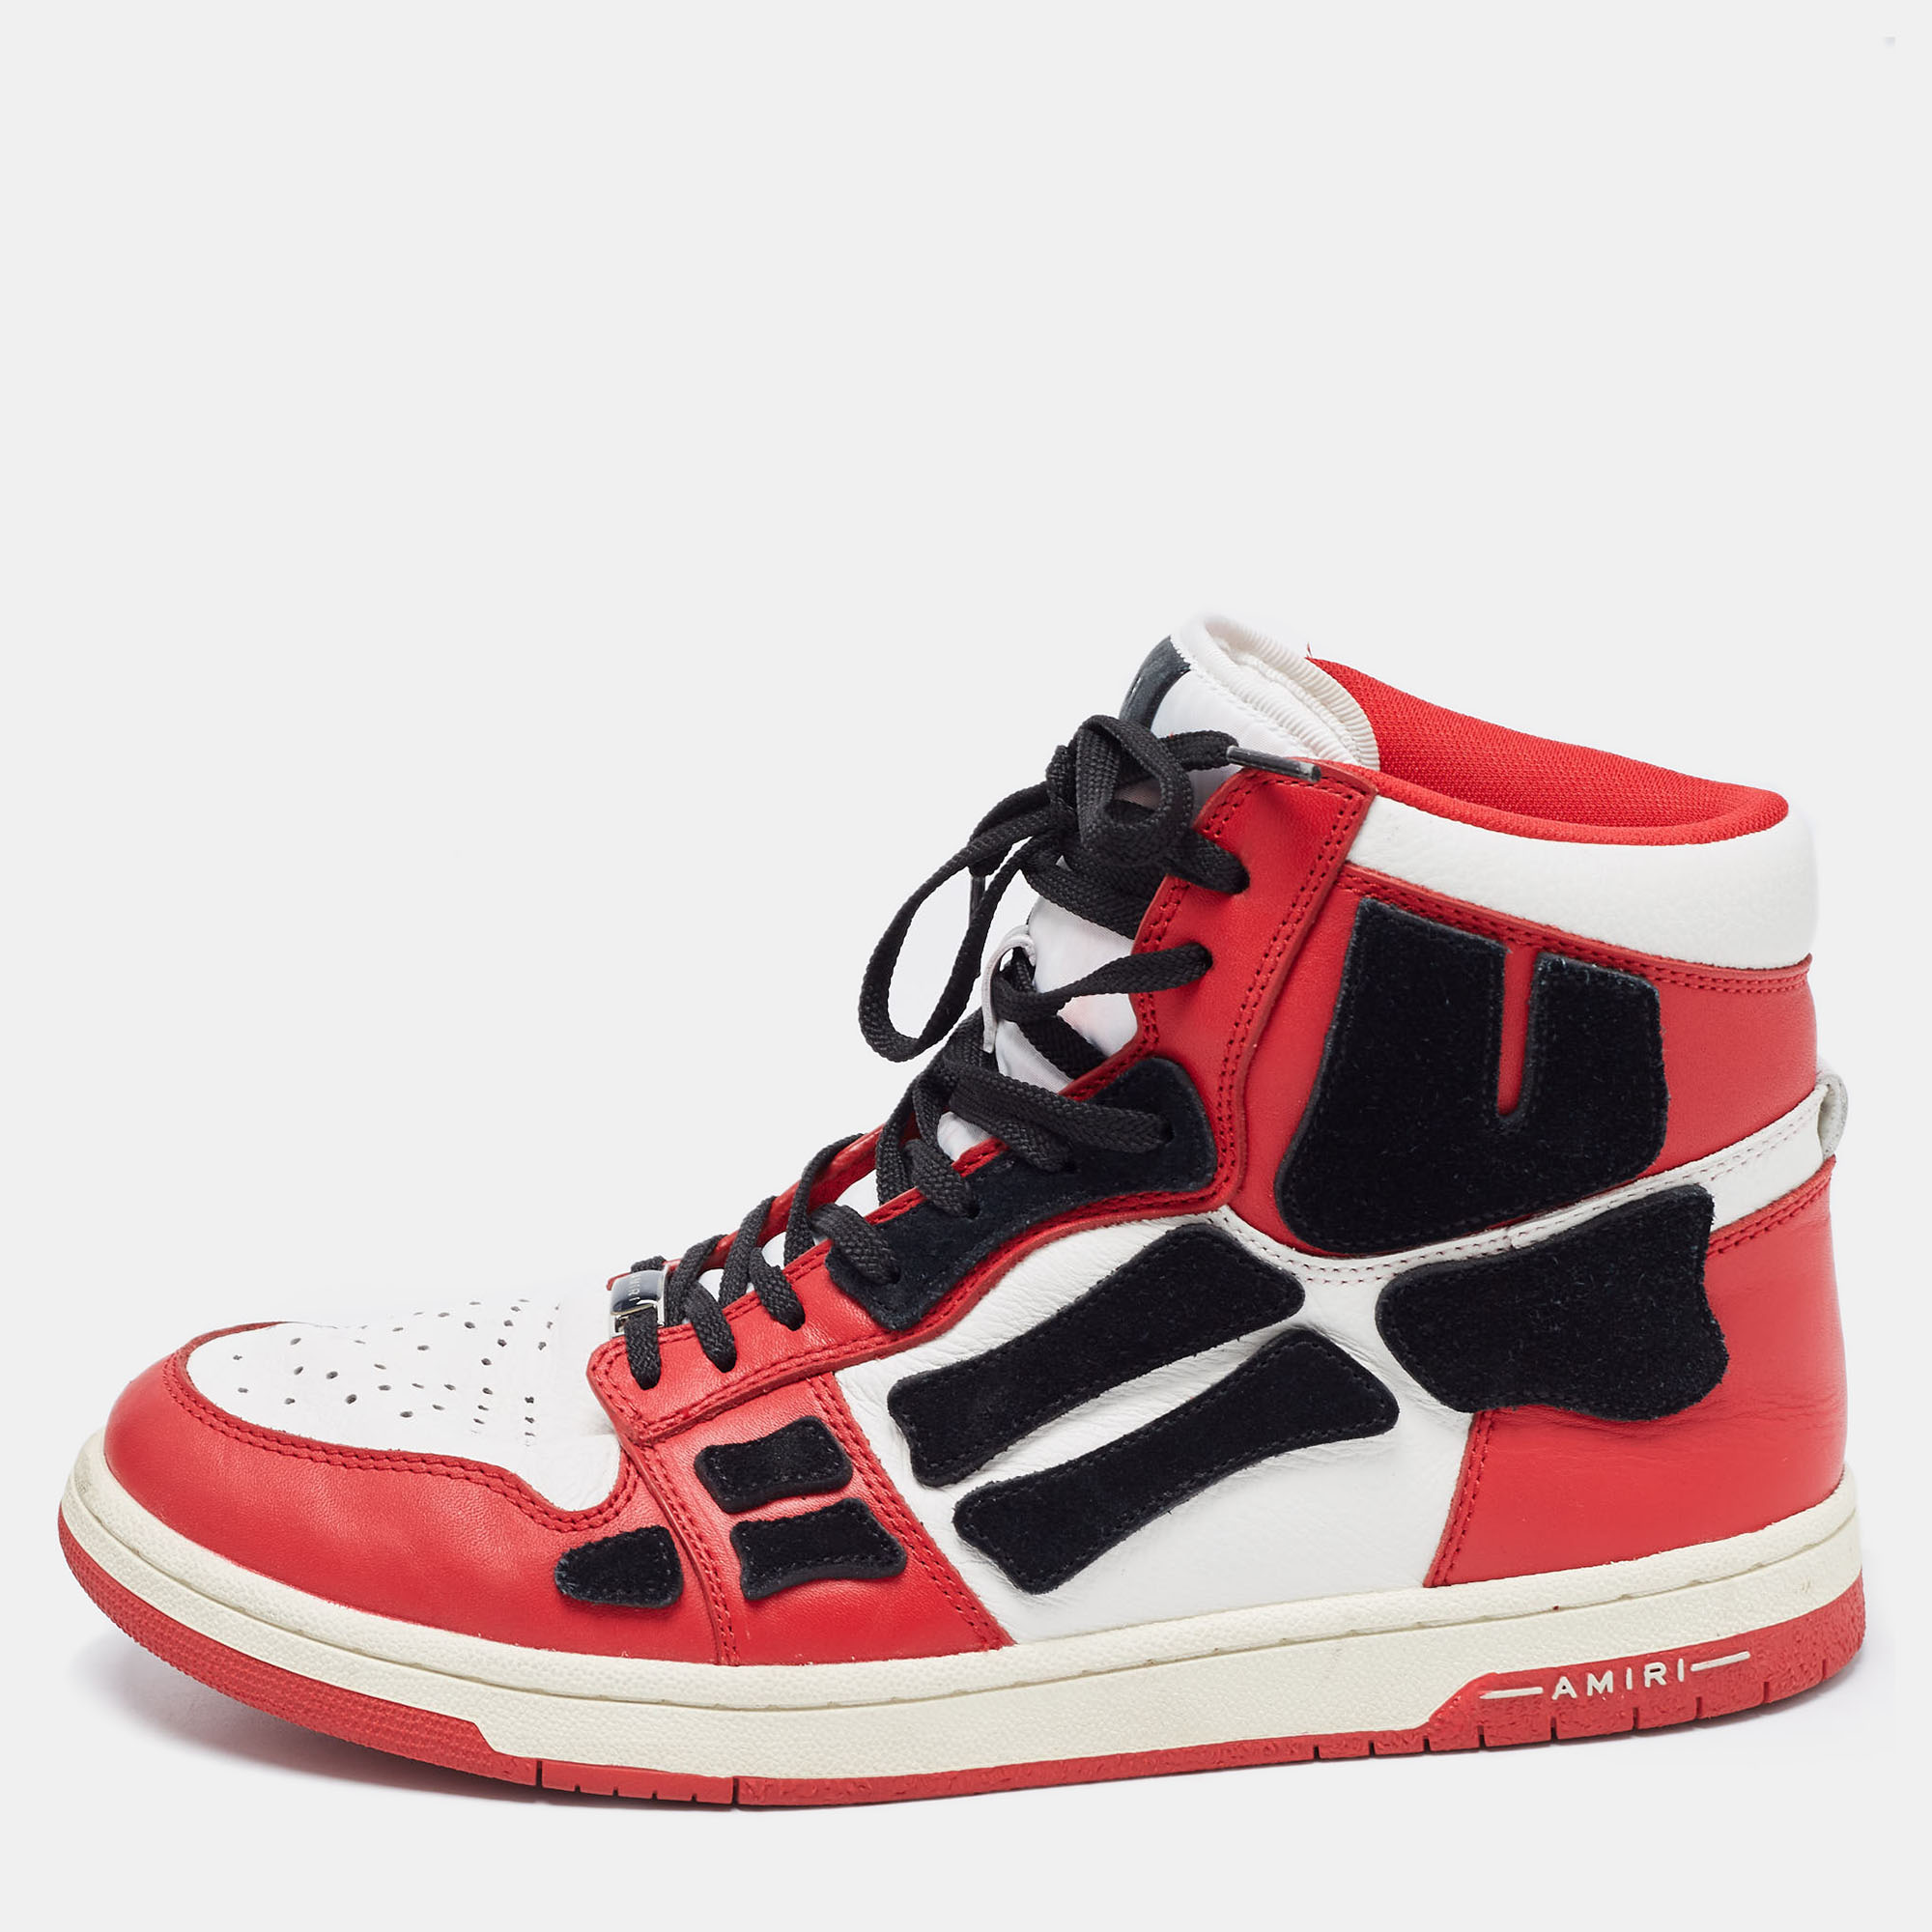 Pre-owned Amiri Red/white Leather Skel High Top Sneakers Size 44